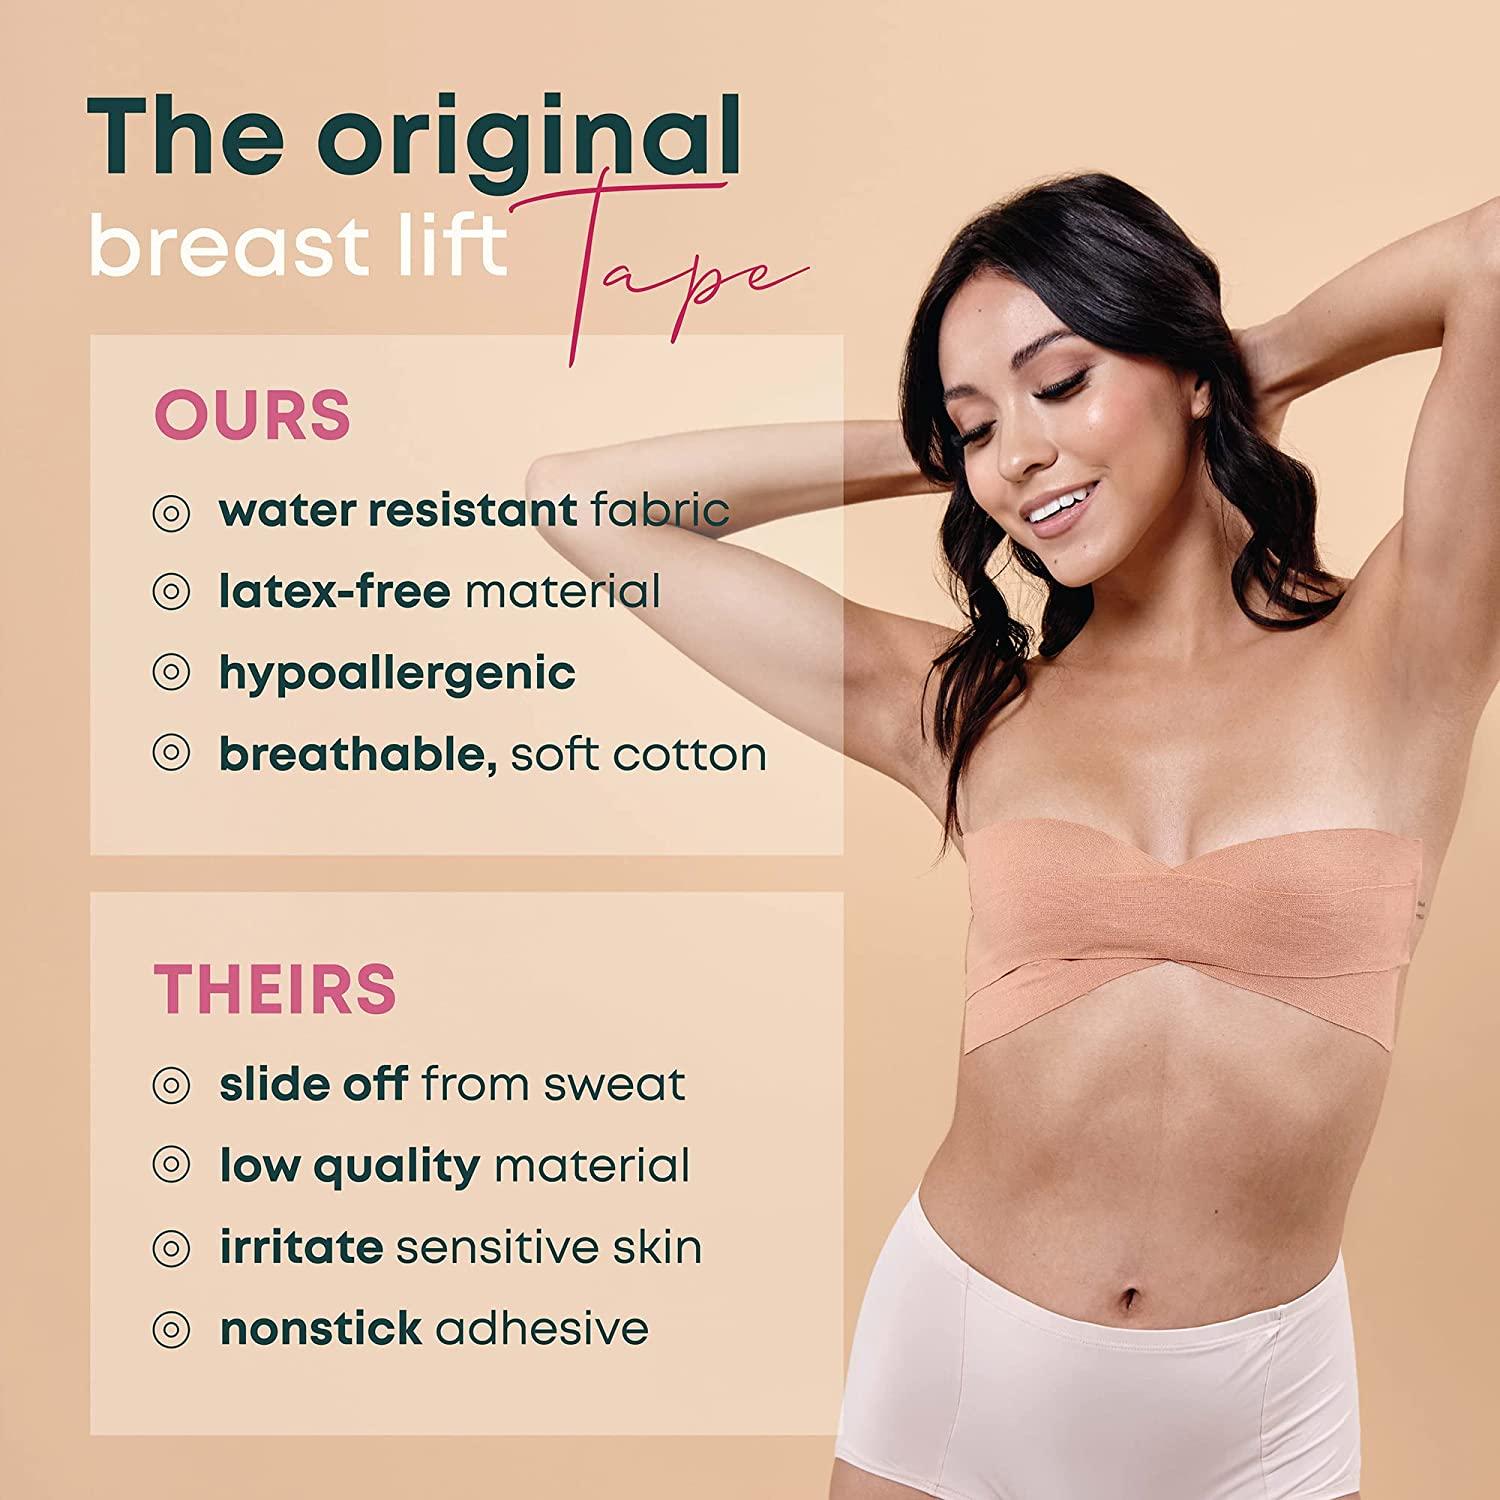 Breast Lift Tape, Boobytape For Breast Lift